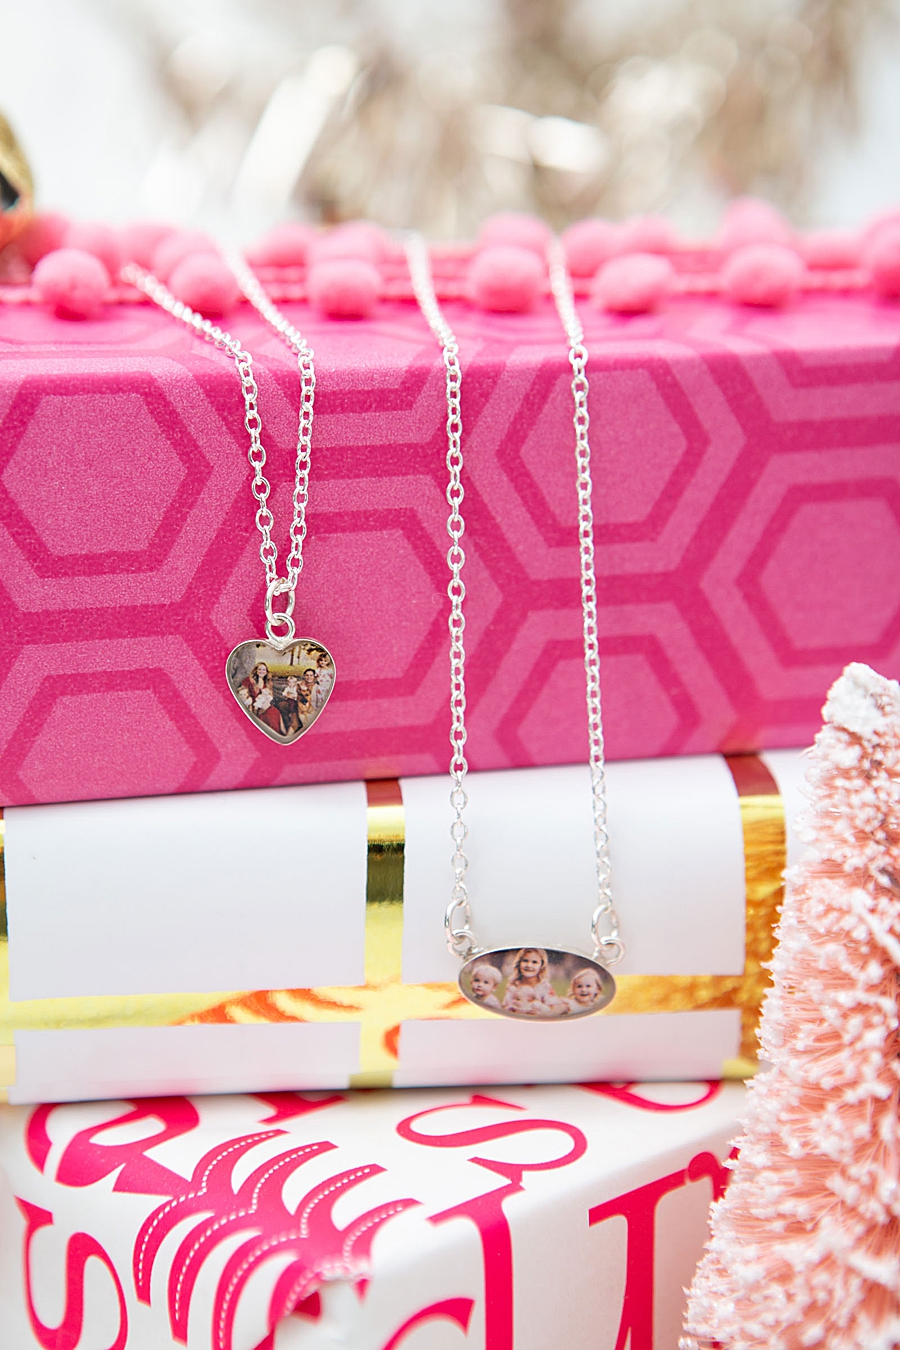 We made the most adorable photo jewelry gifts, see how we did it!